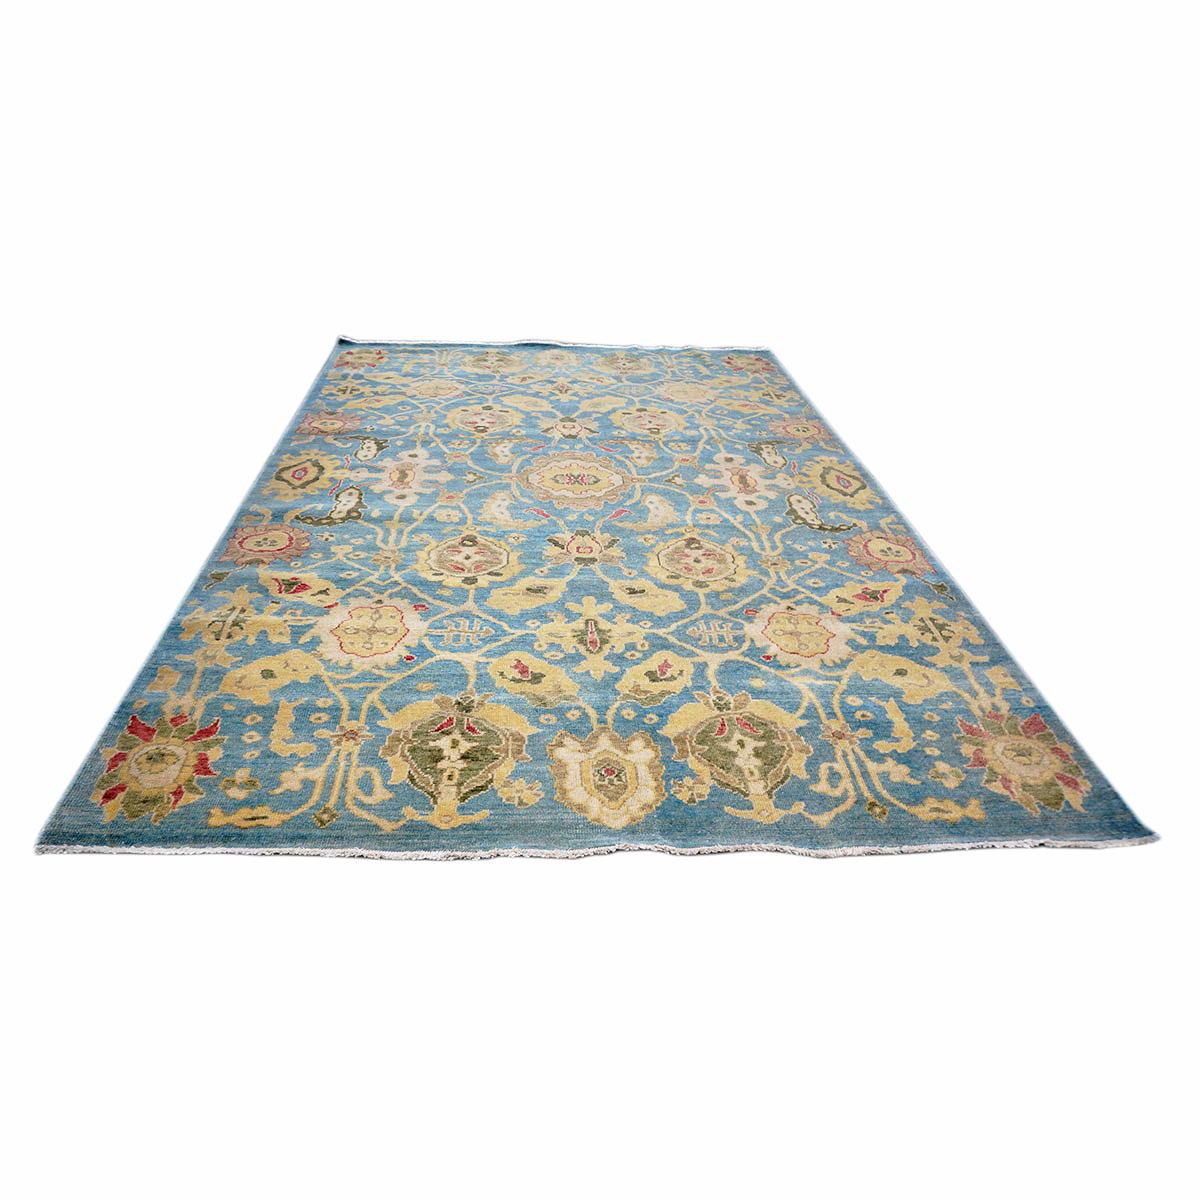 Ashly Fine Rugs presents an antique recreation of an original Afghan Sultanabad 6x9 Blue & Yellow Handmade Area Rug. Part of our own previous production, this antique recreation was thought of and created in-house and 100% handmade in Afghanistan by